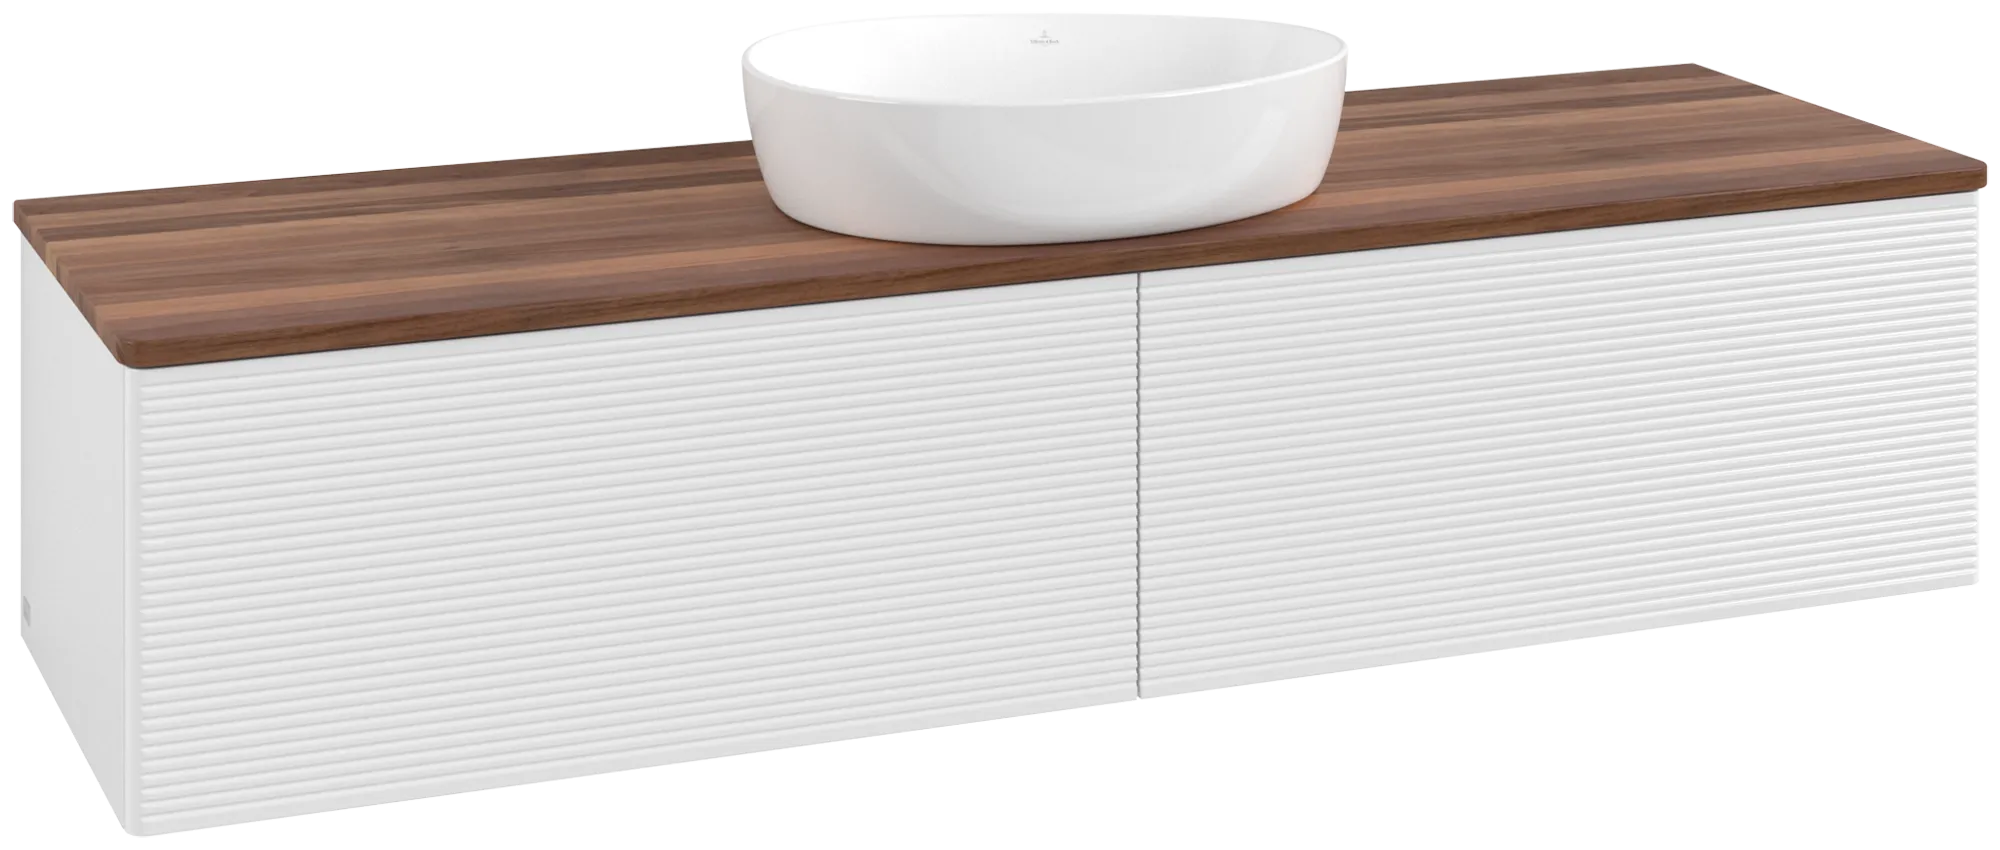 Зображення з  VILLEROY BOCH Antao Vanity unit, with lighting, 2 pull-out compartments, 1600 x 360 x 500 mm, Front with grain texture, Glossy White Lacquer / Warm Walnut #L36112GF